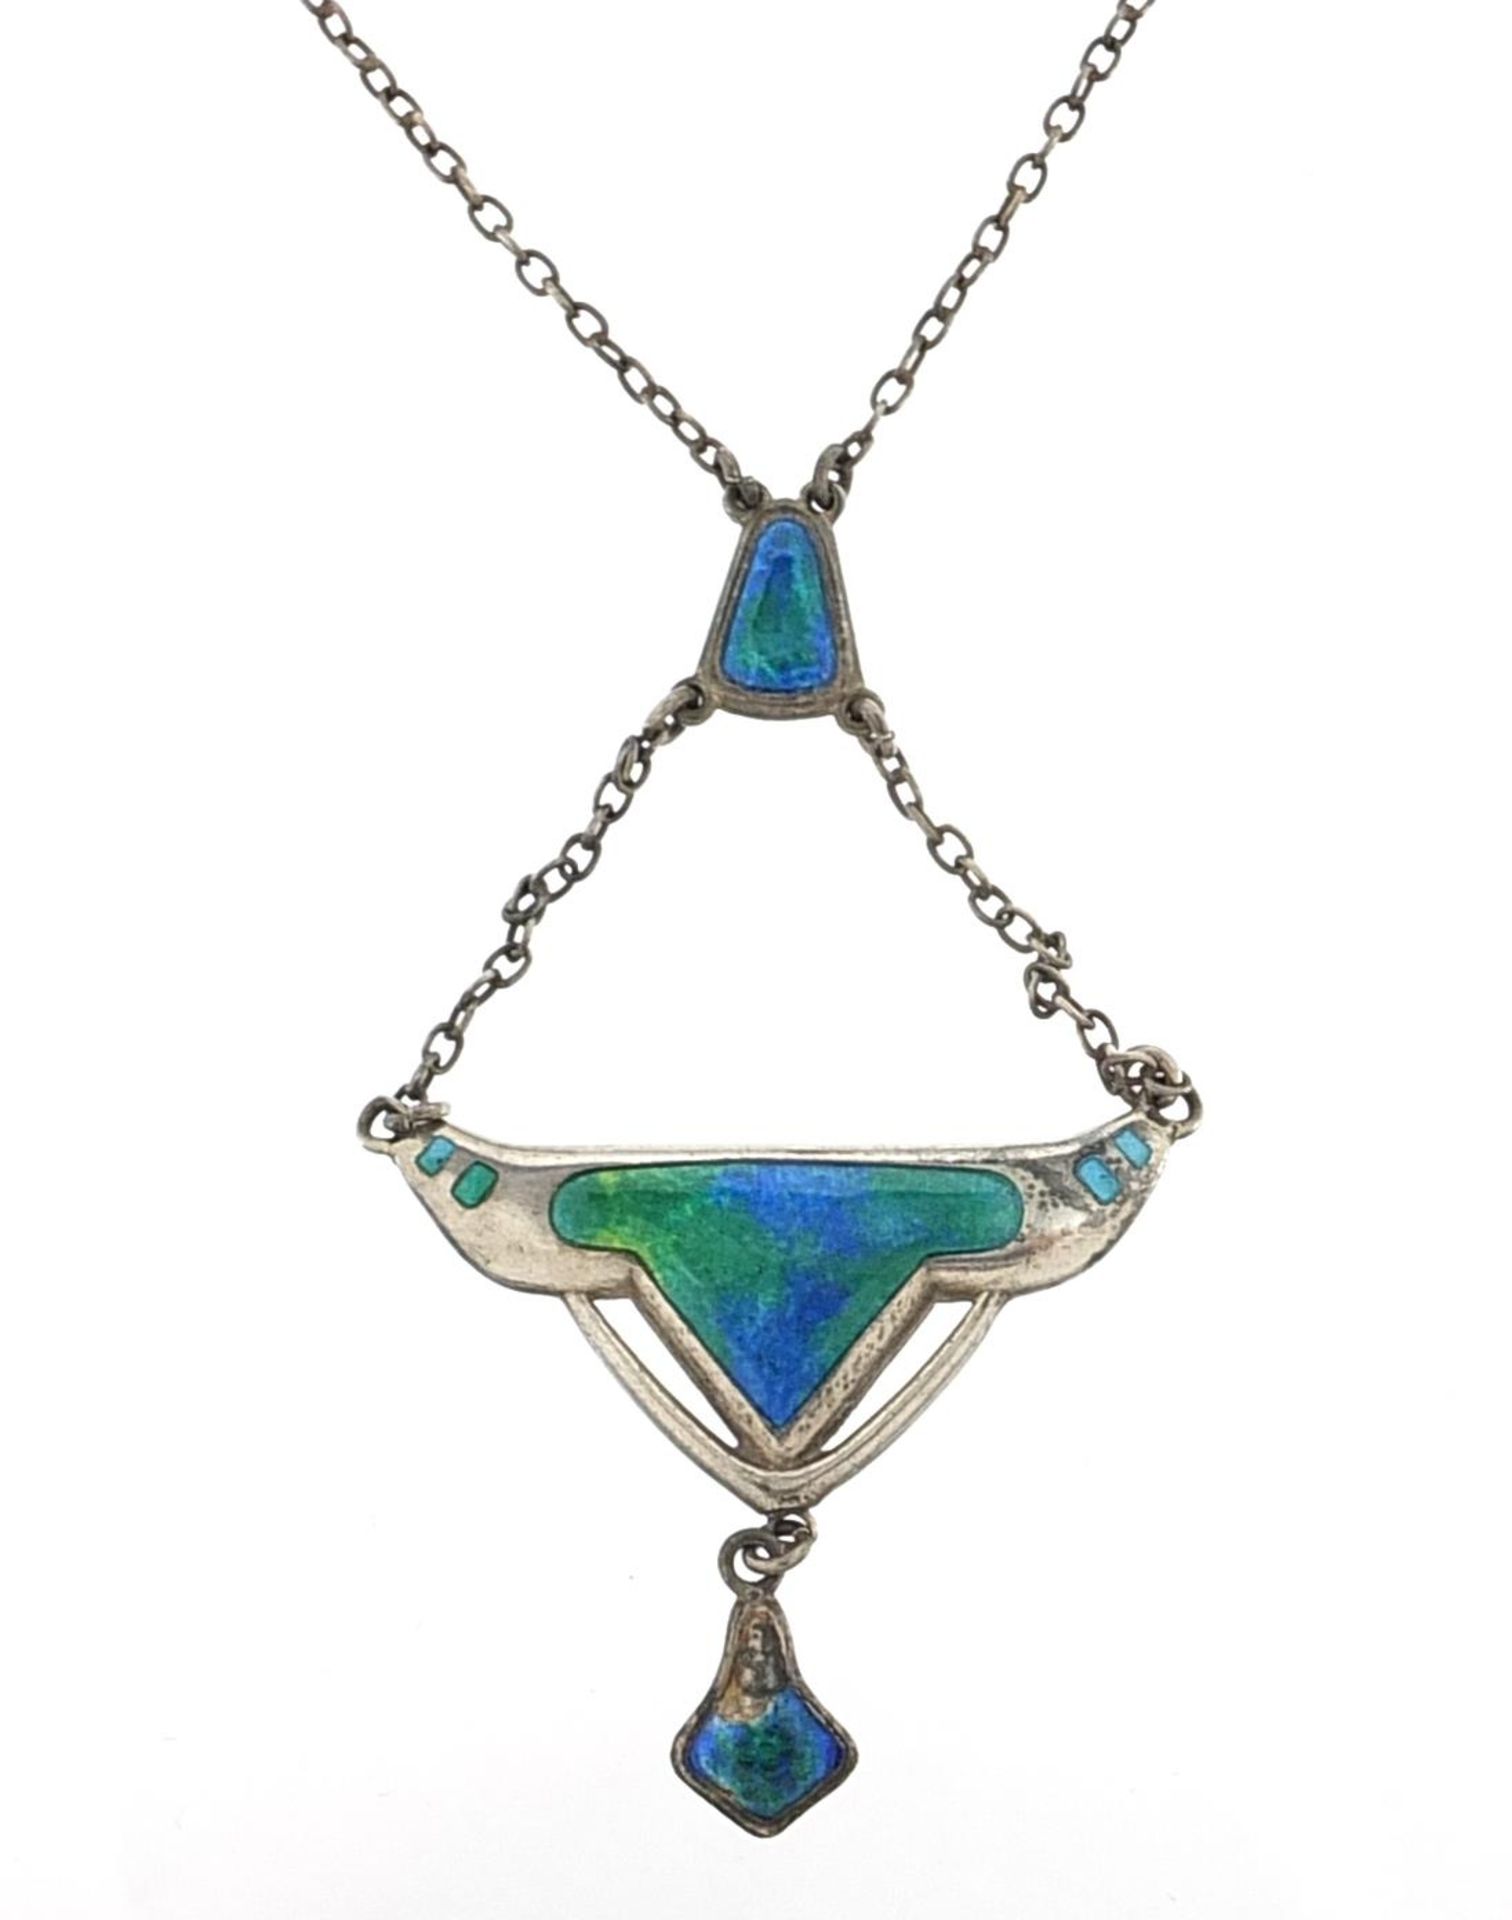 Charles Horner, Art Nouveau silver and enamel necklace, Chester 1909, 38cm in length, 8.0g